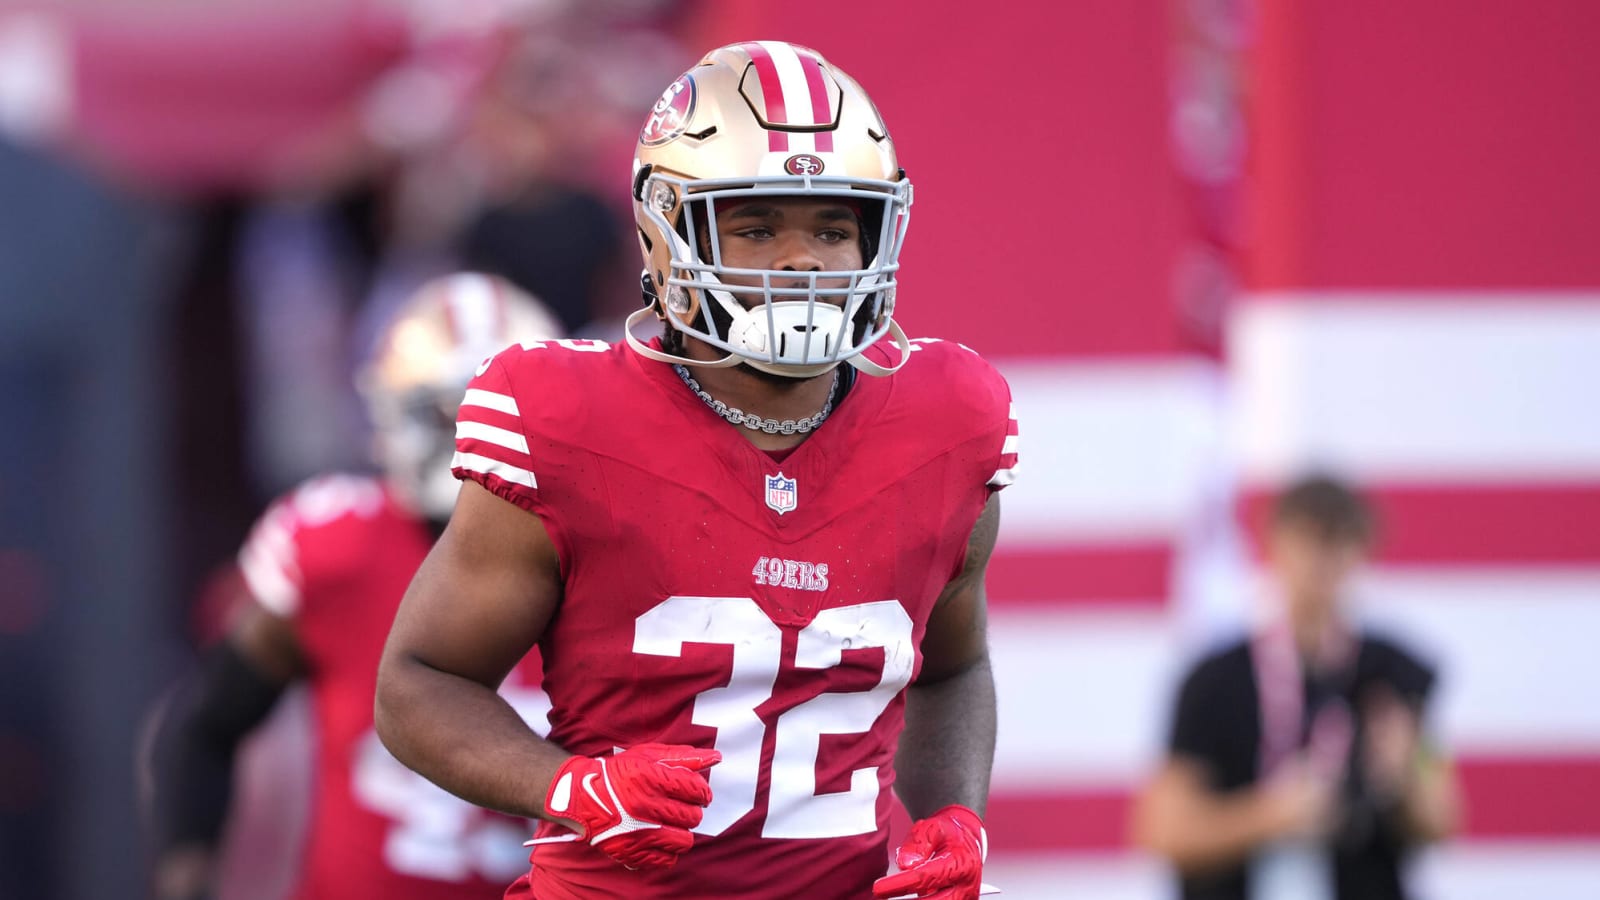 Eagles sign former 49ers RB to futures deal